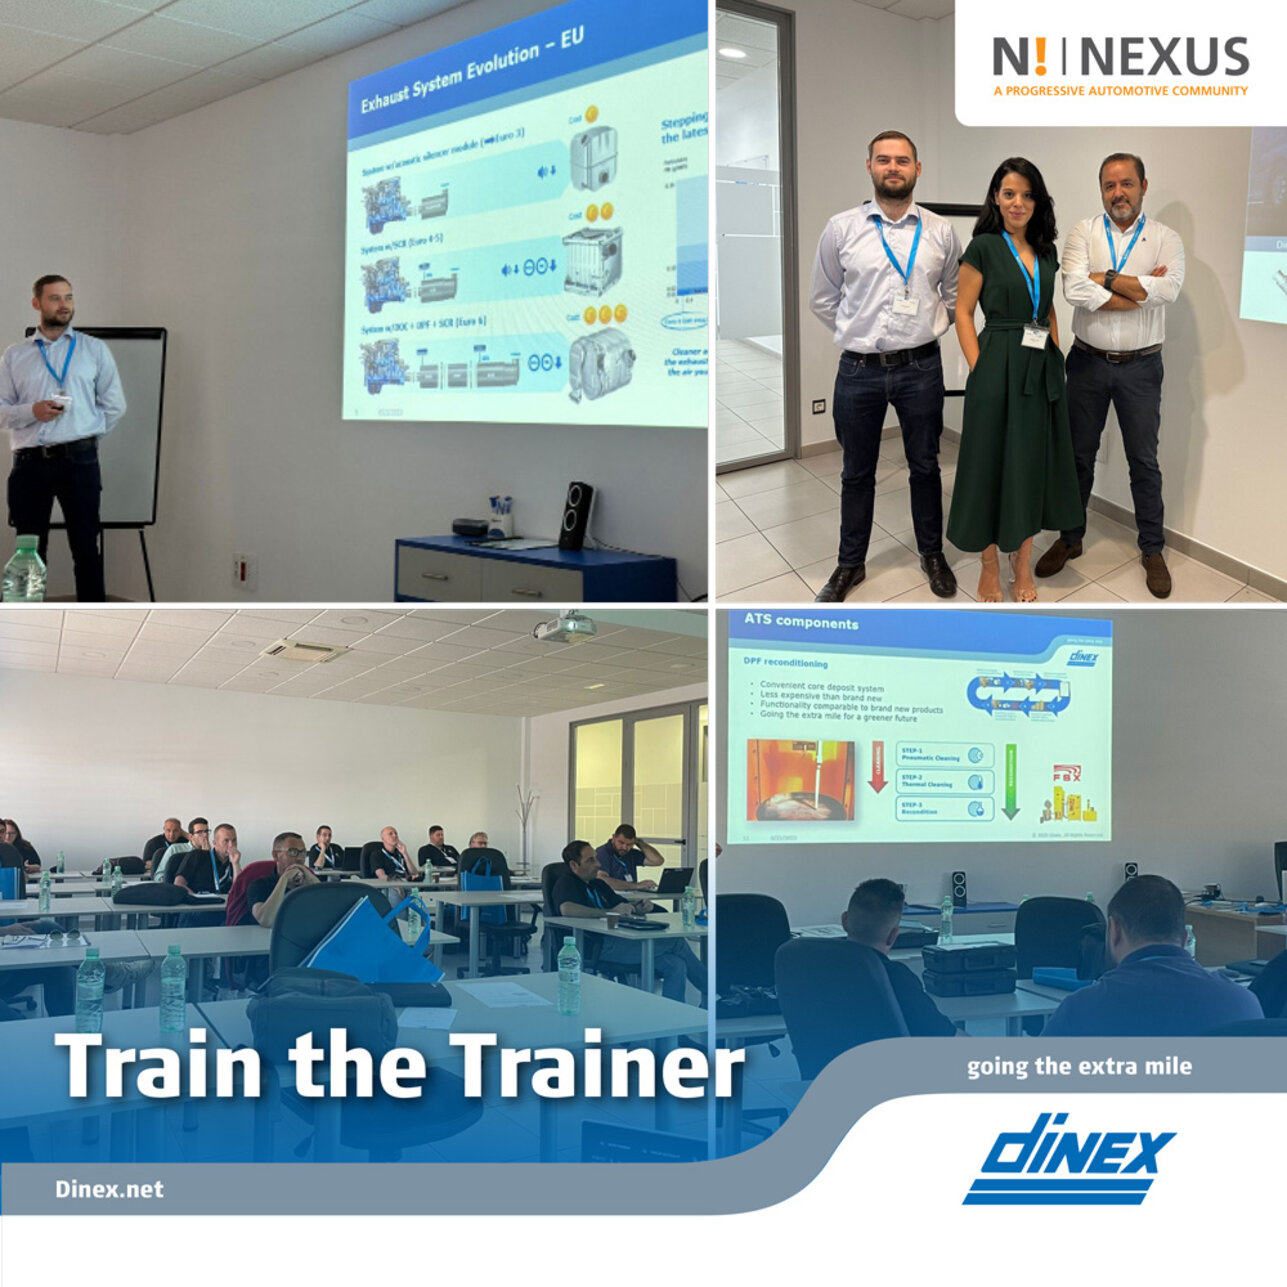 “Train the Trainer” event in Spain organized by Nexus Academy